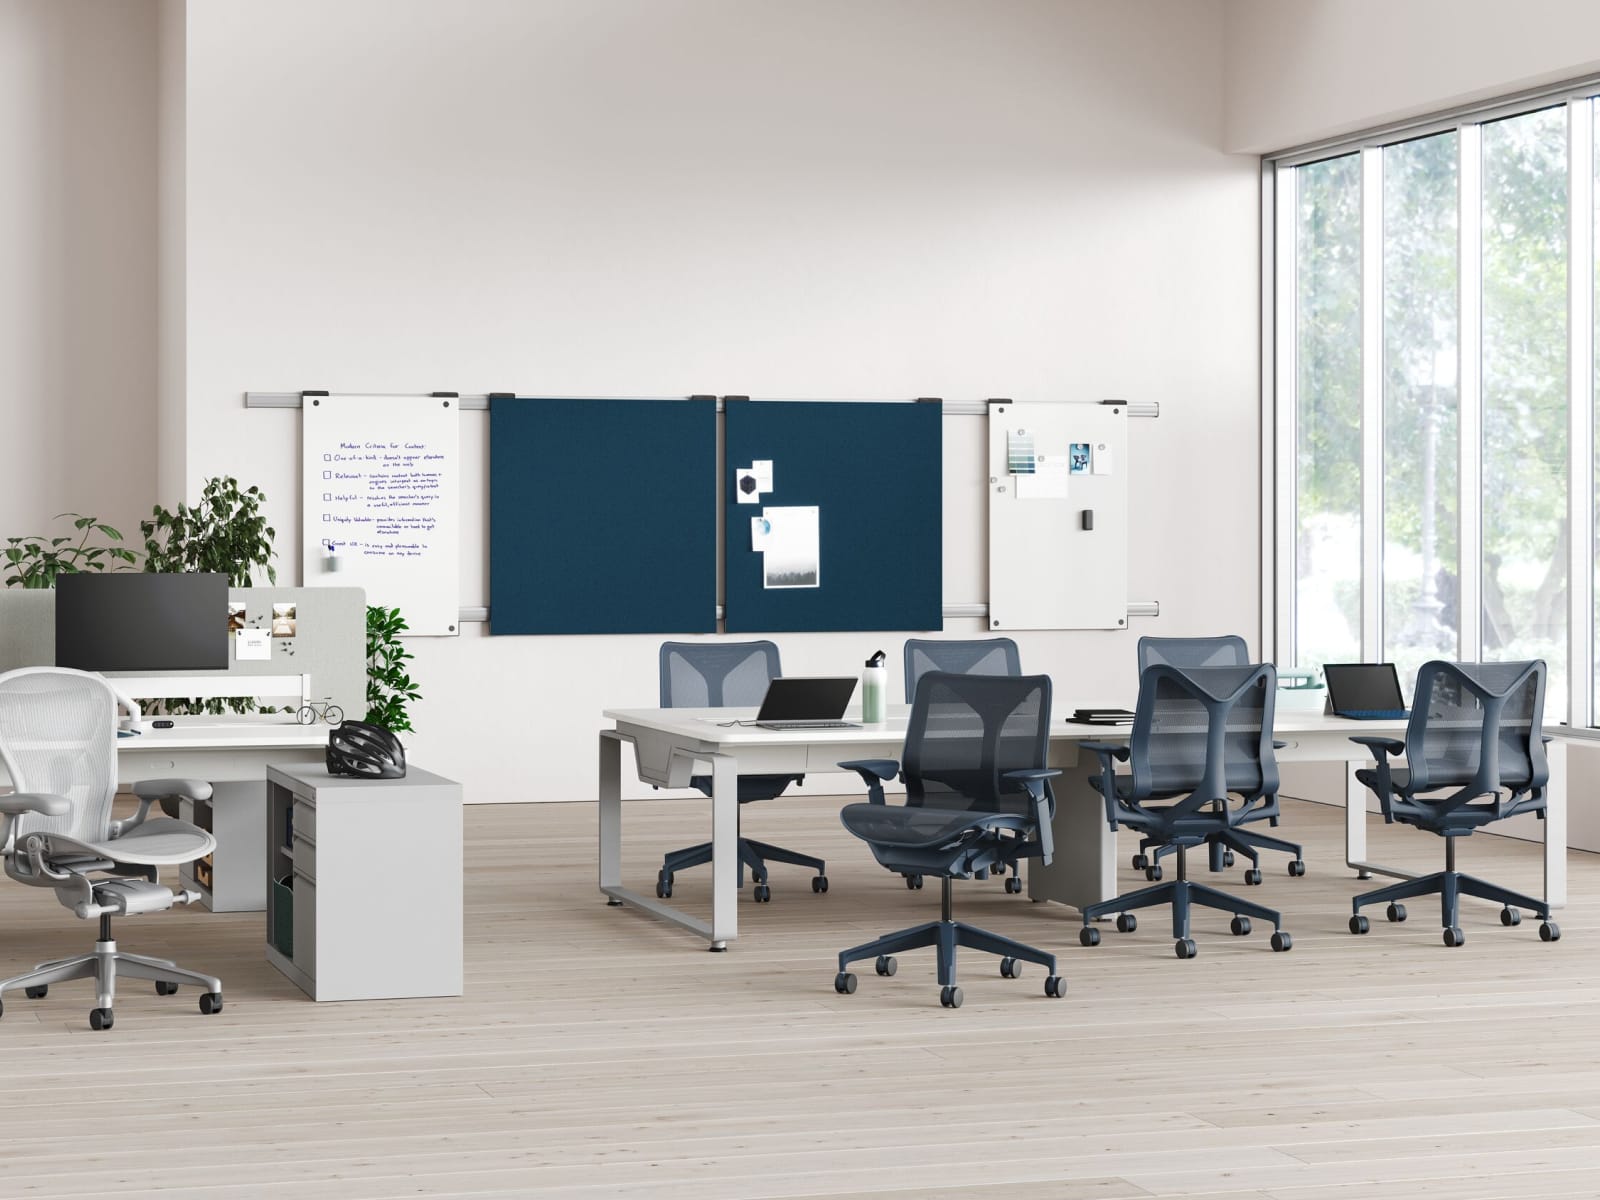 Byne System in 4- and 6-seat clusters with Arras legs, next to Aeron Chairs, Cosm Chairs, and CK Storage.